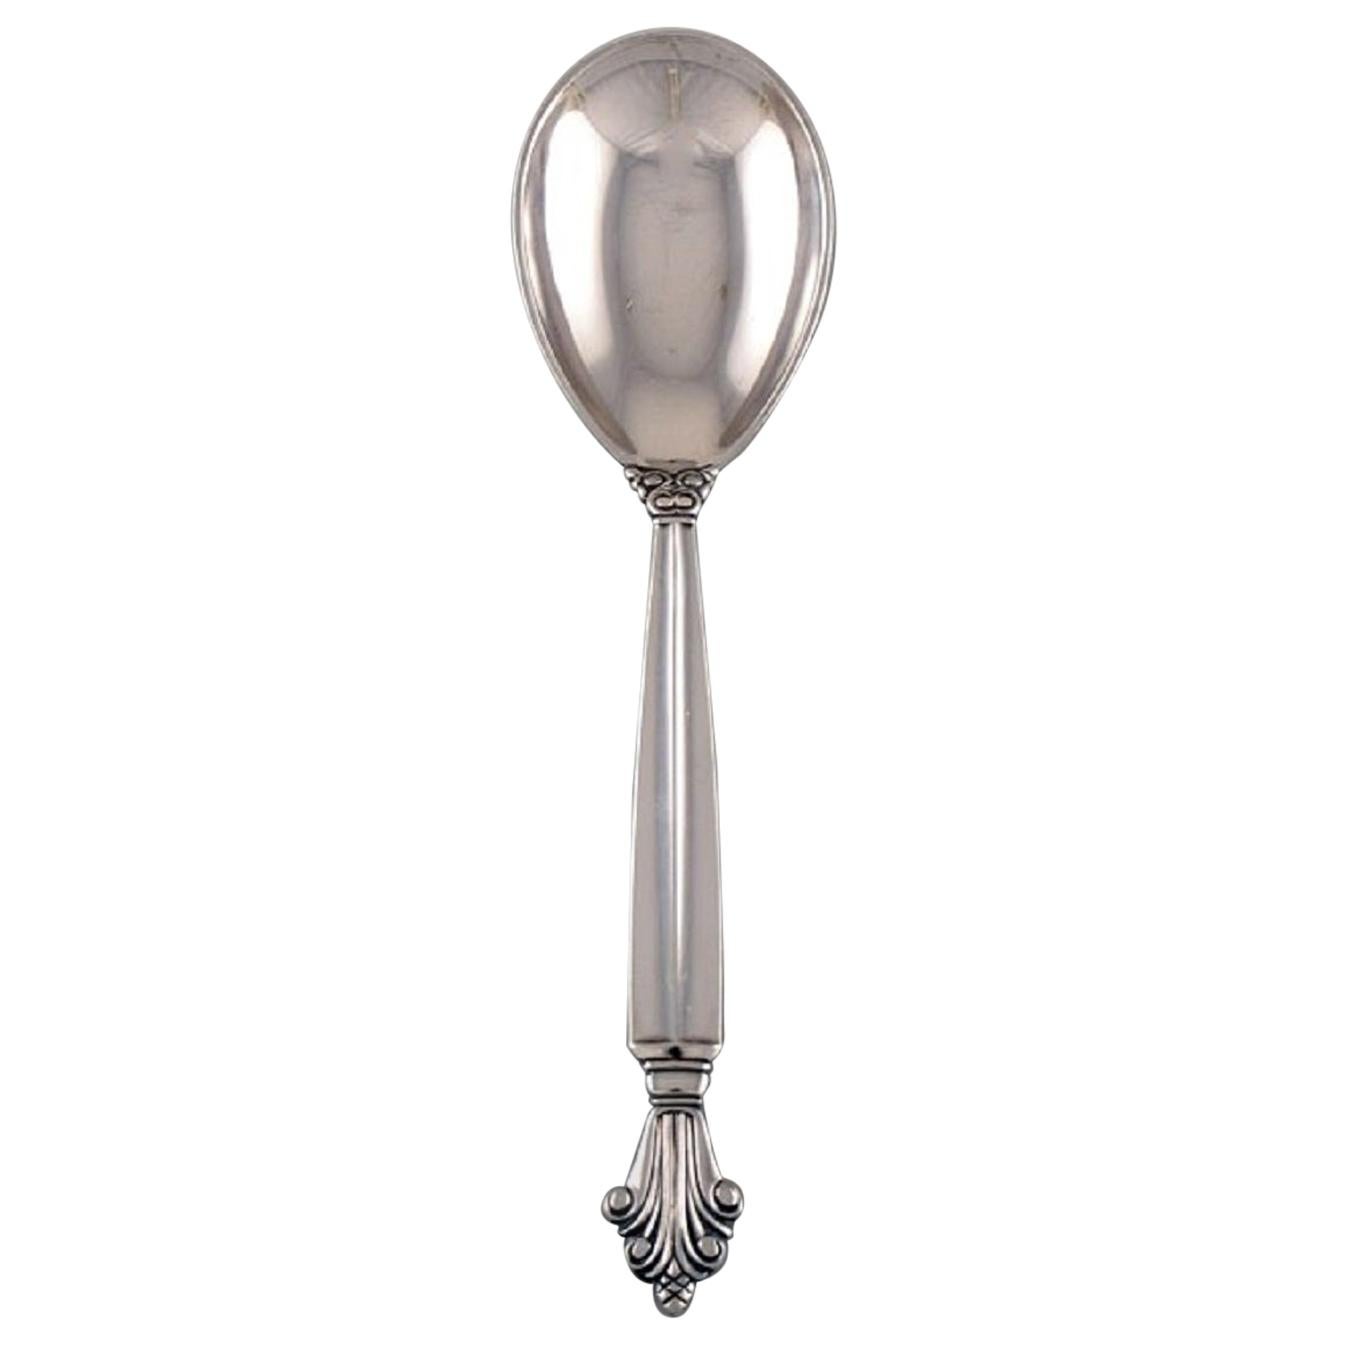 Johan Rohde for Georg Jensen, Acanthus Jam Spoon in Sterling Silver